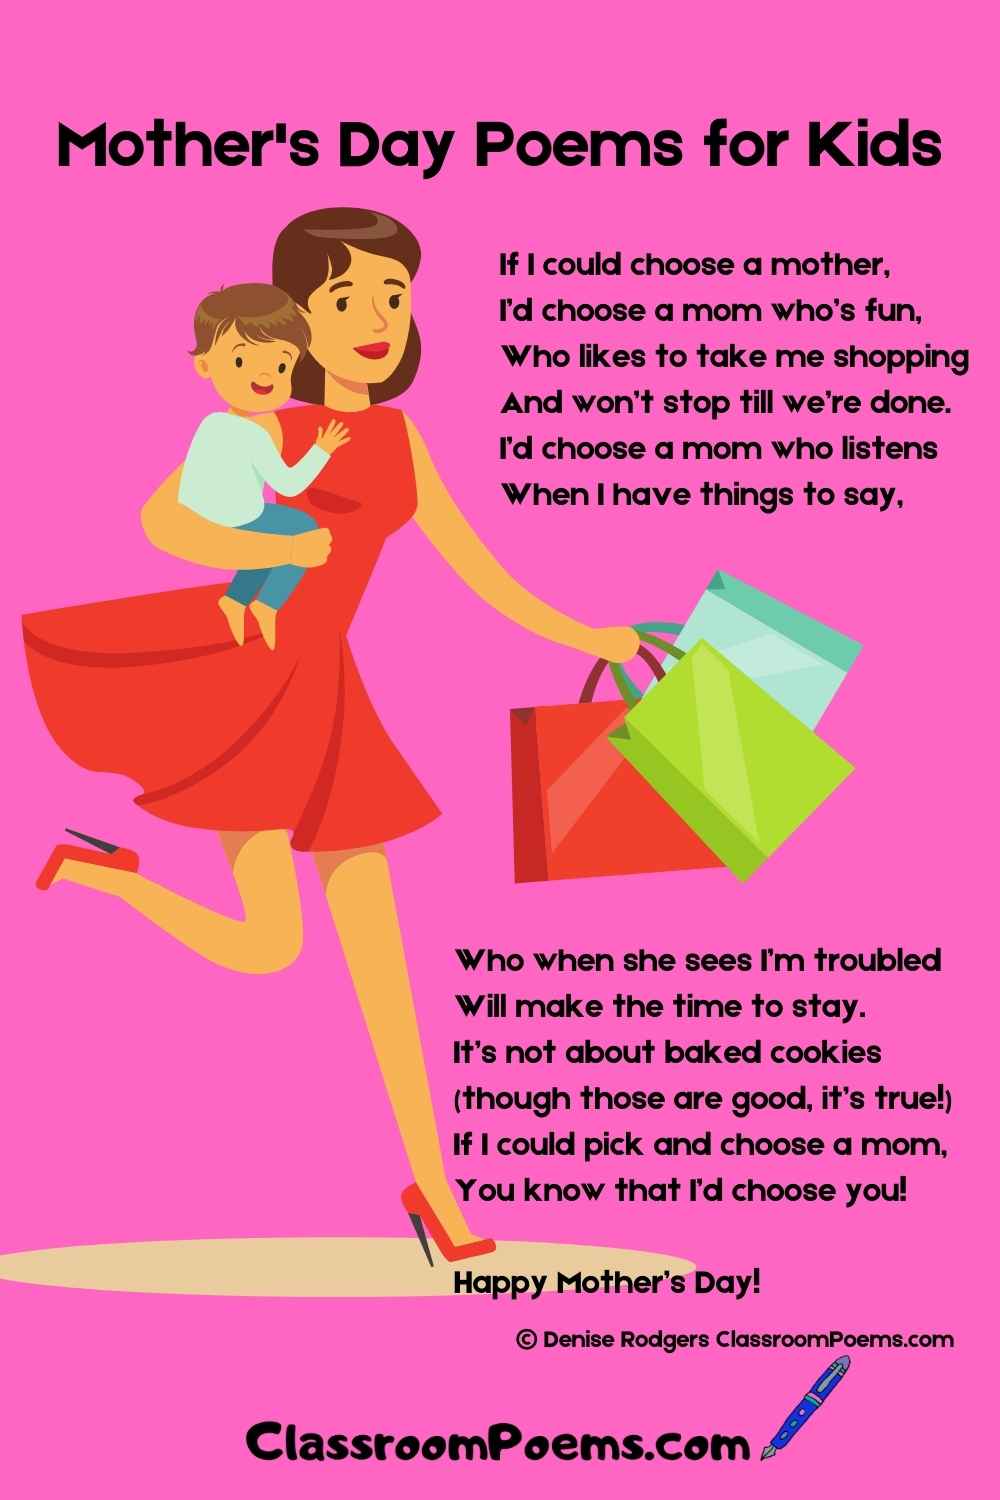 happy birthday poems for mom from kids